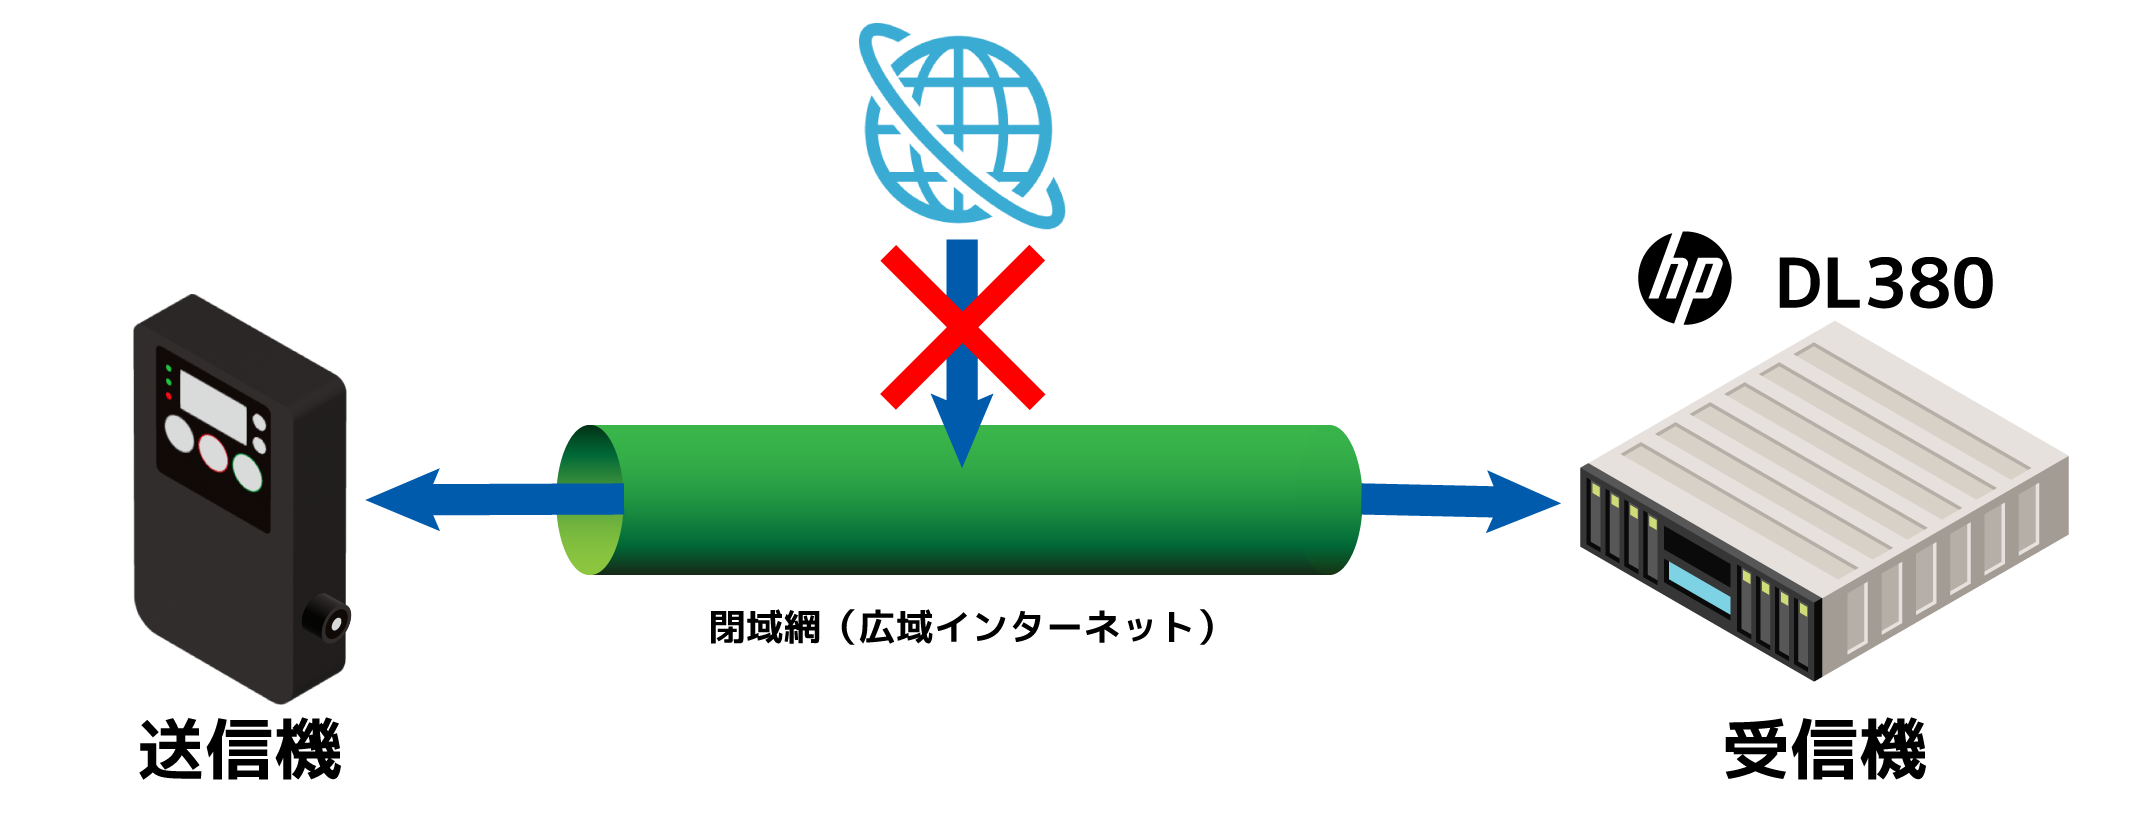 Closed Network Image